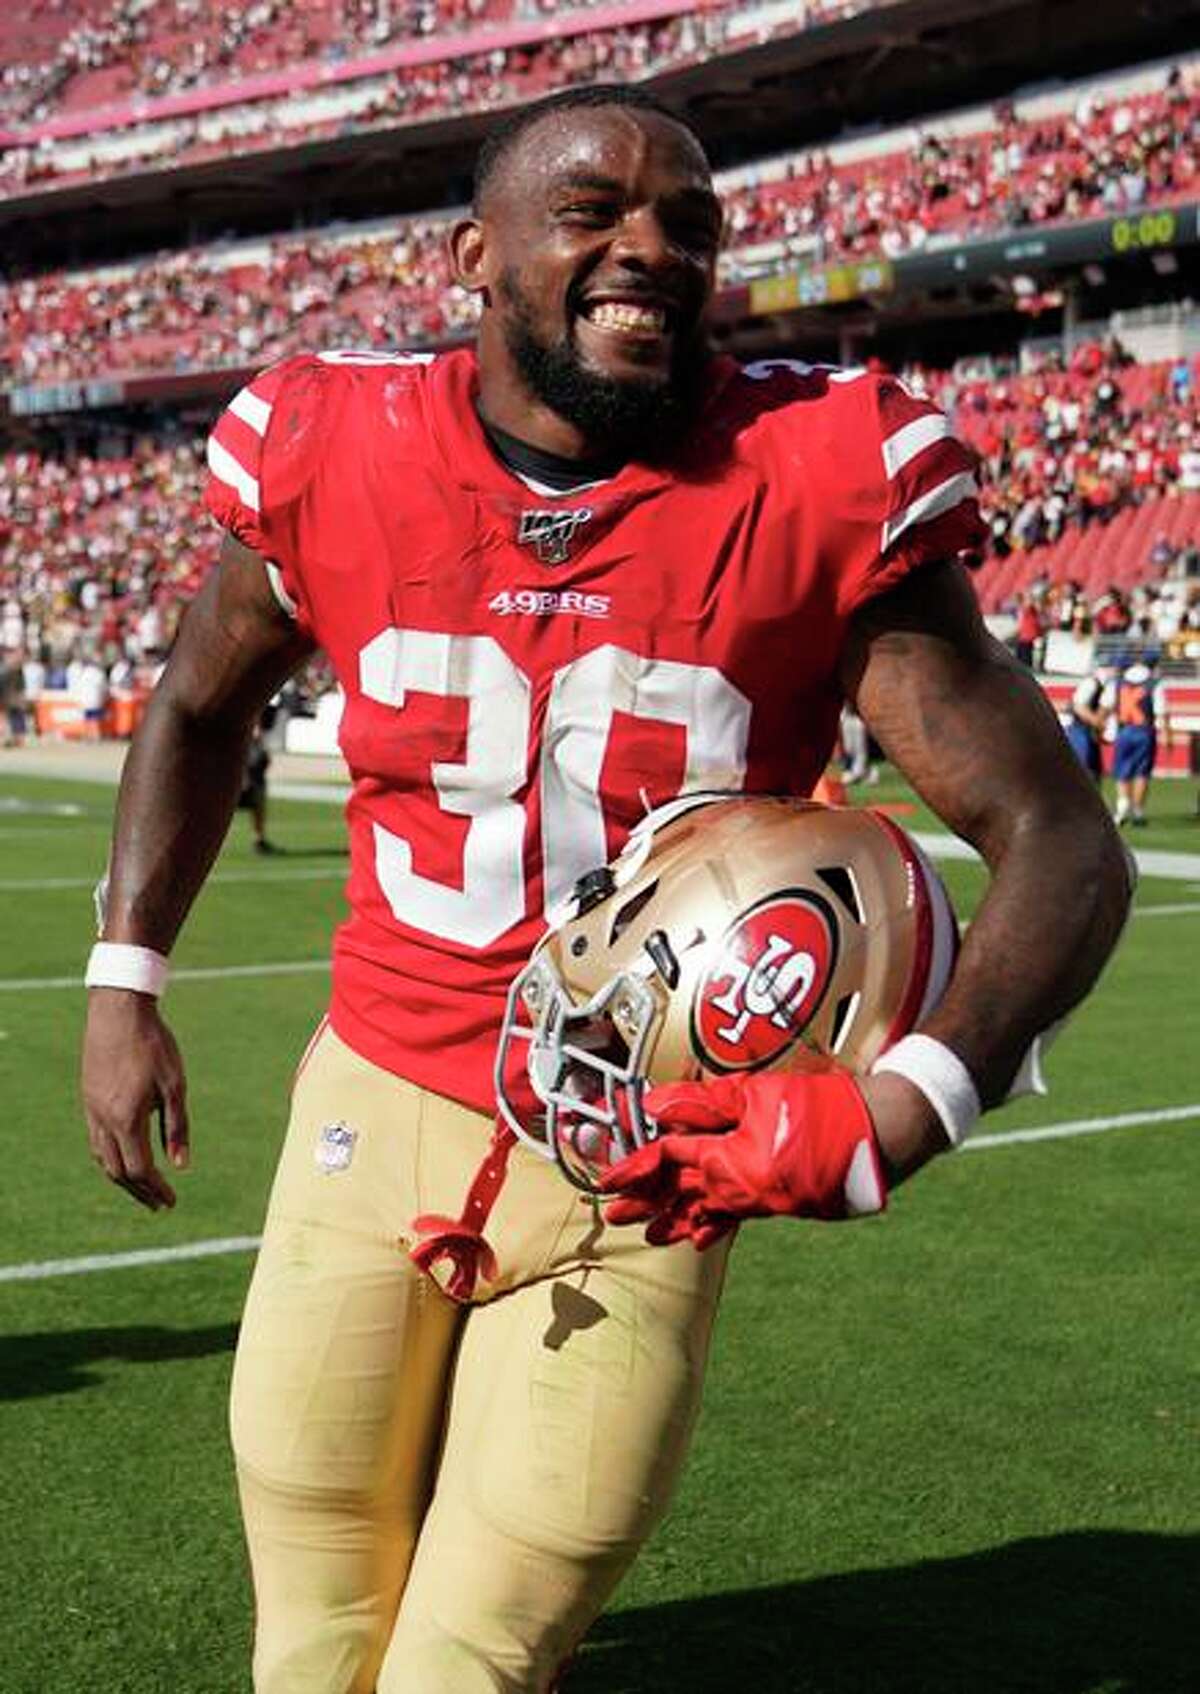 Niners running back Jeff Wilson wasn’t aware of his role in the fantasy dispute.